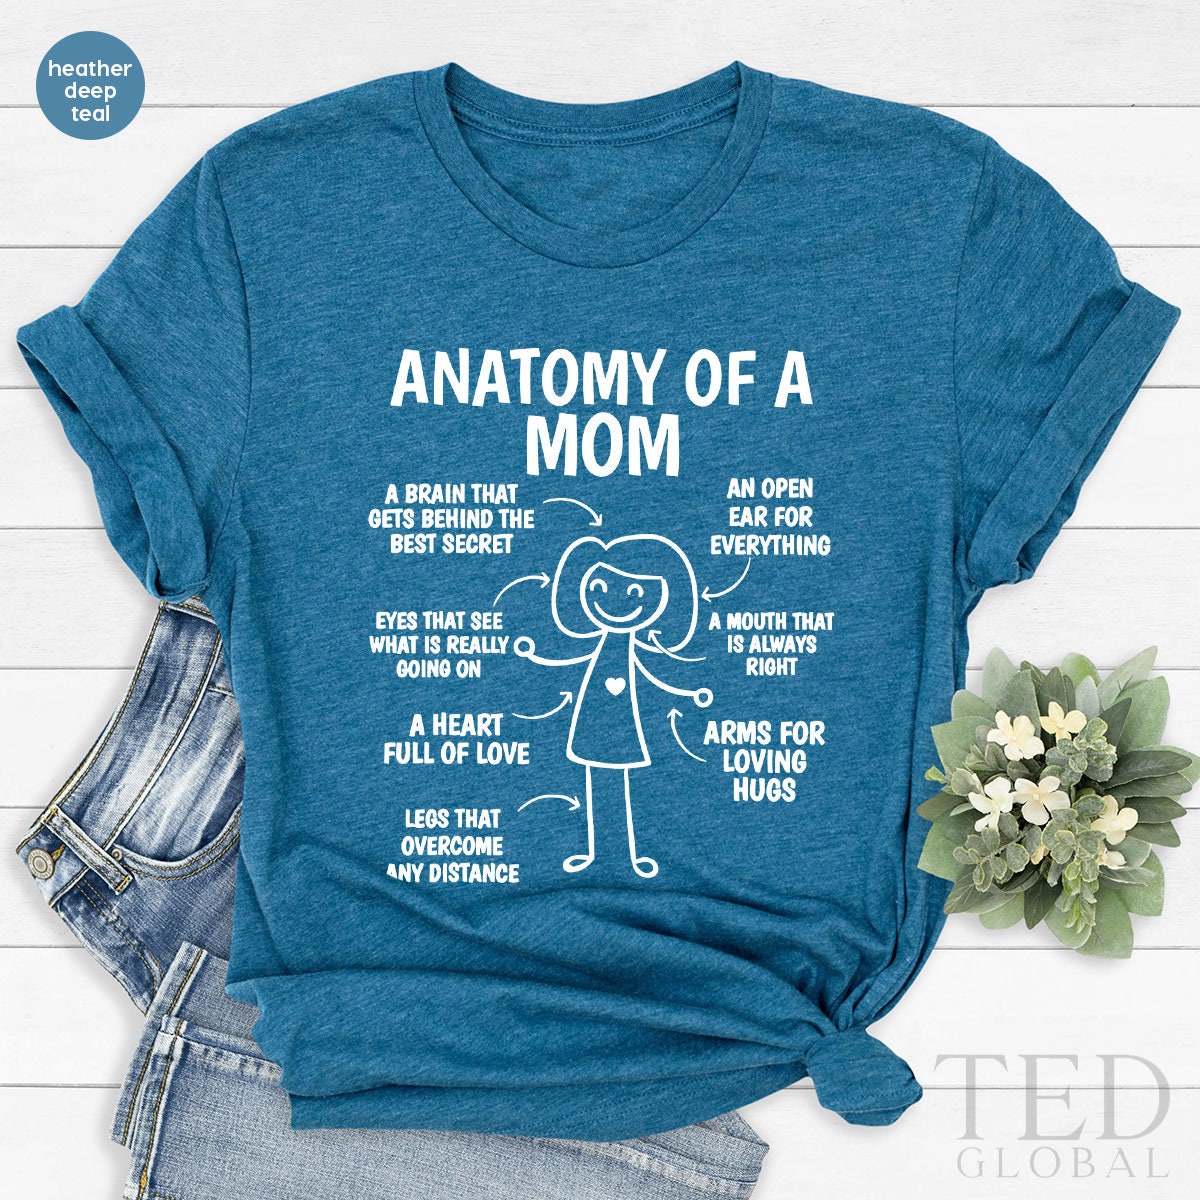 Funny Mom T Shirt, Meaningful Gift For Mother, Anatomy Of A Mom Shirt, Mom Birthday Gift, Cute Mother Shirt From Kids, Motherhoods TShirt - Fastdeliverytees.com